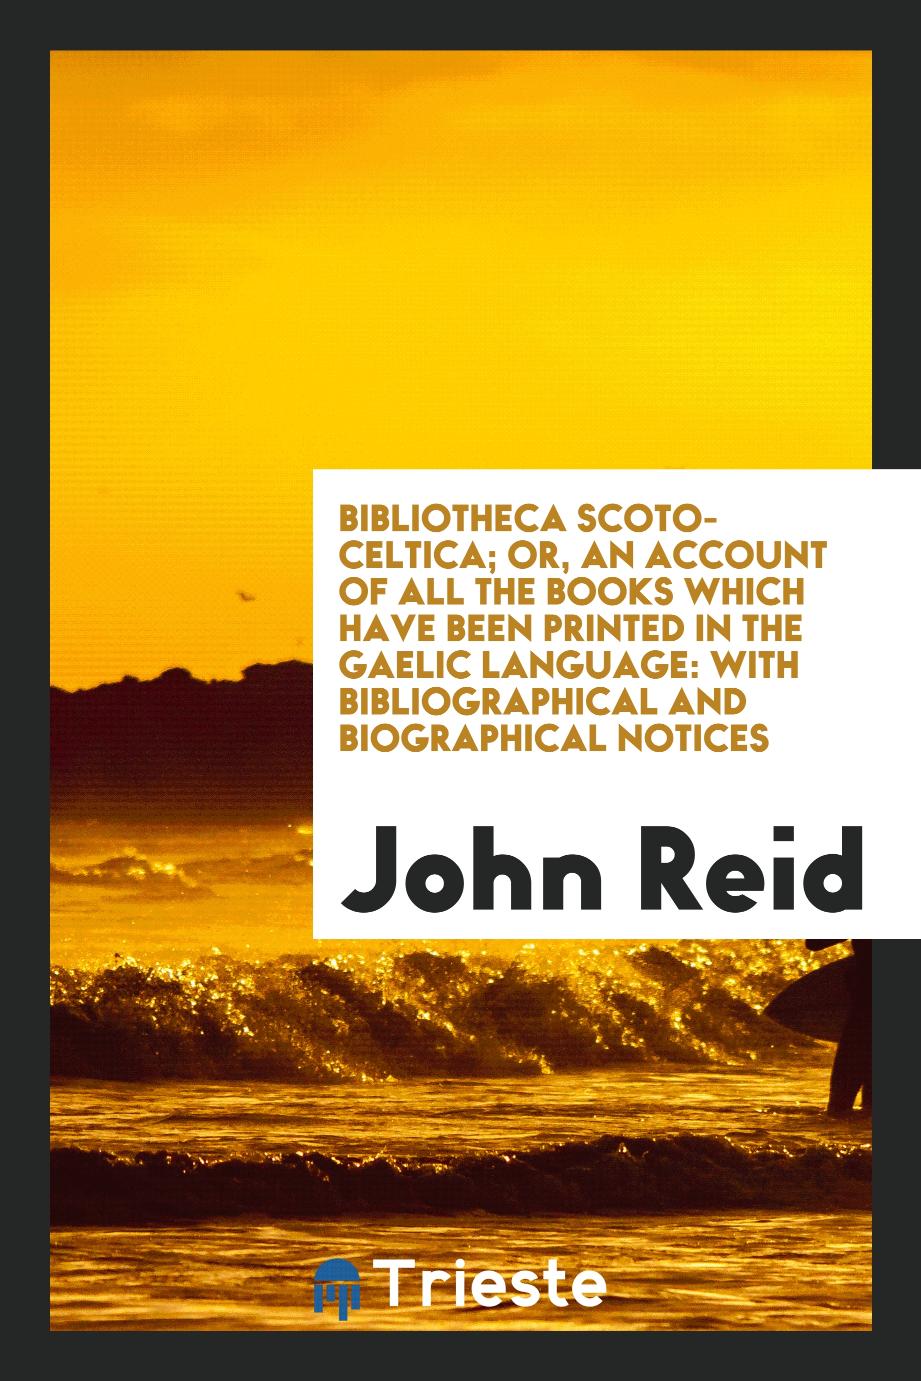 Bibliotheca Scoto-Celtica; or, An account of all the books which have been printed in the Gaelic language: with bibliographical and biographical notices